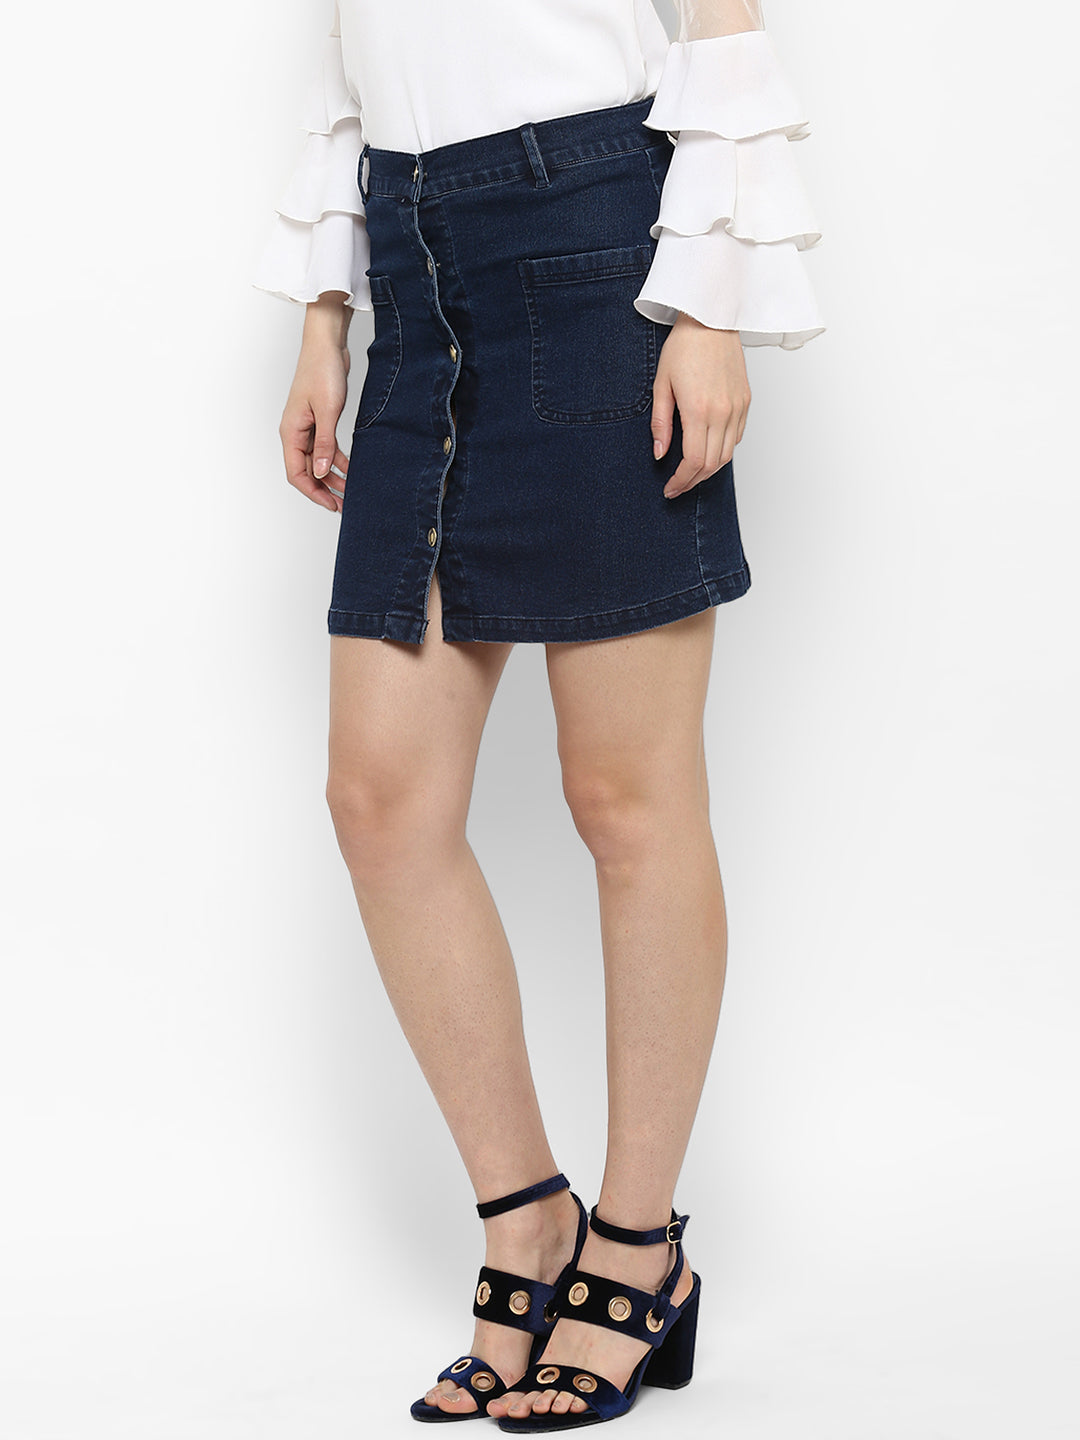 Women's Denim Skirt with Front Buttons